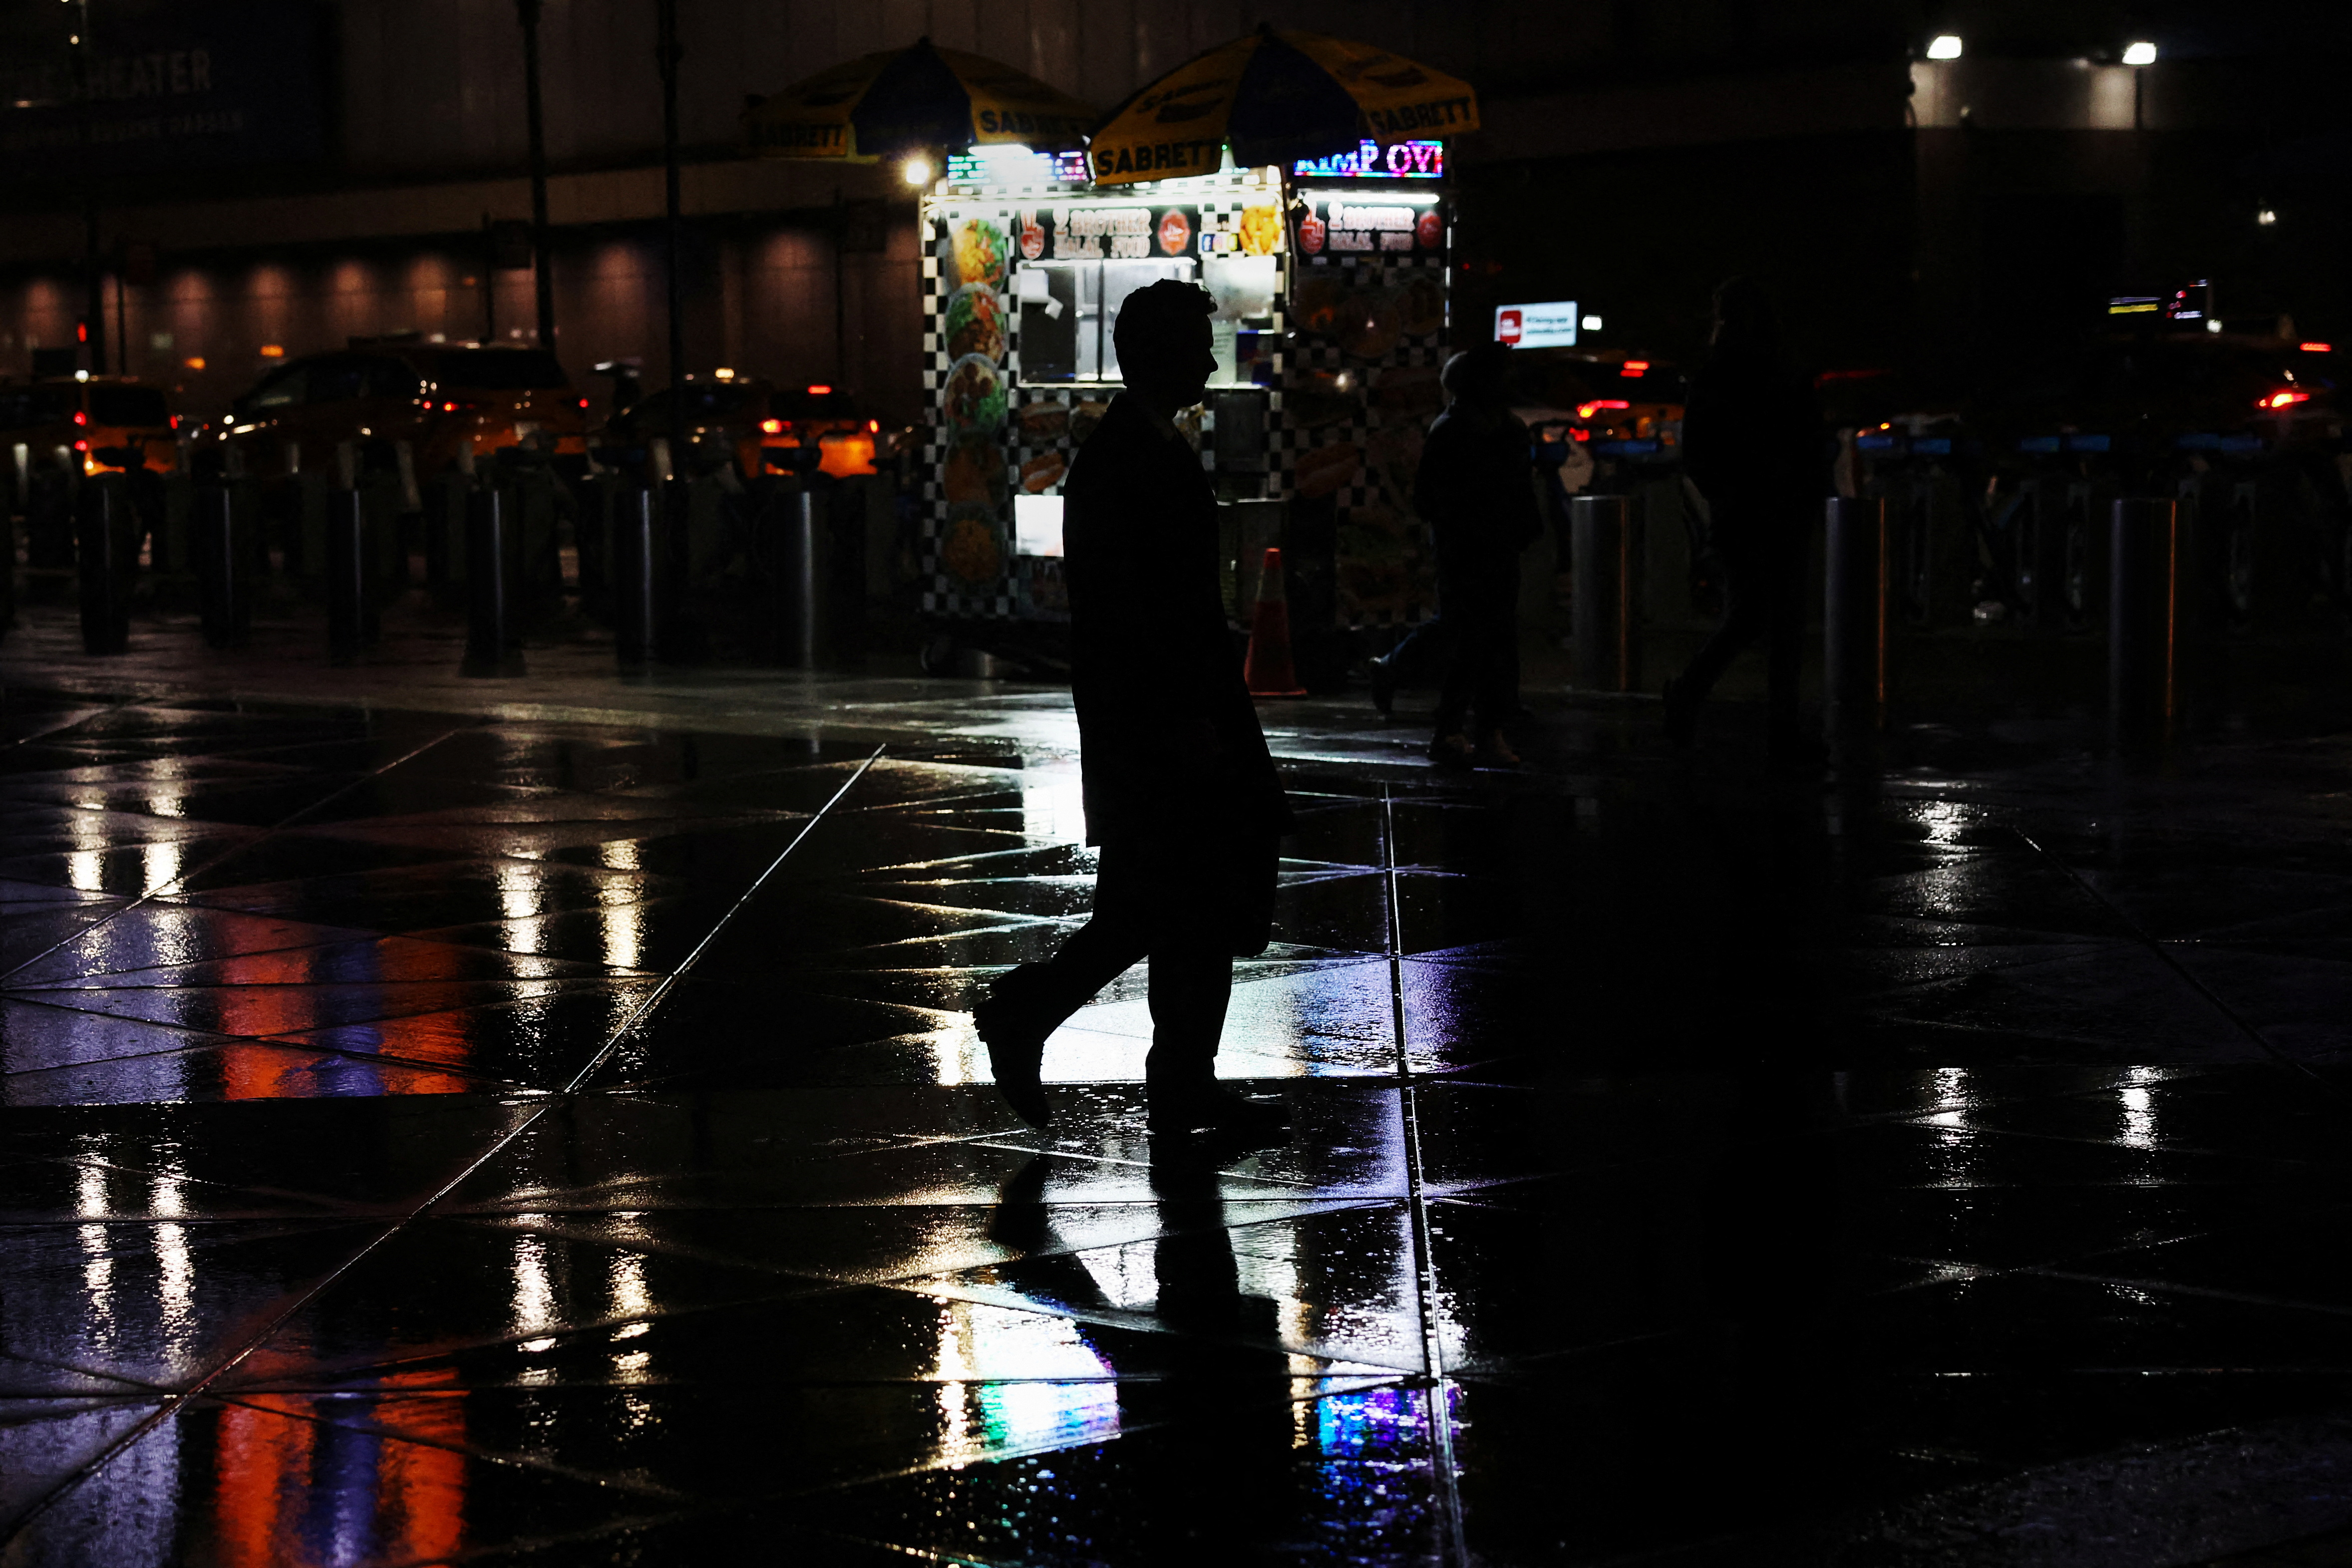 A man walks in silhouette during rainy weather across Pennsylvania Station in New York City